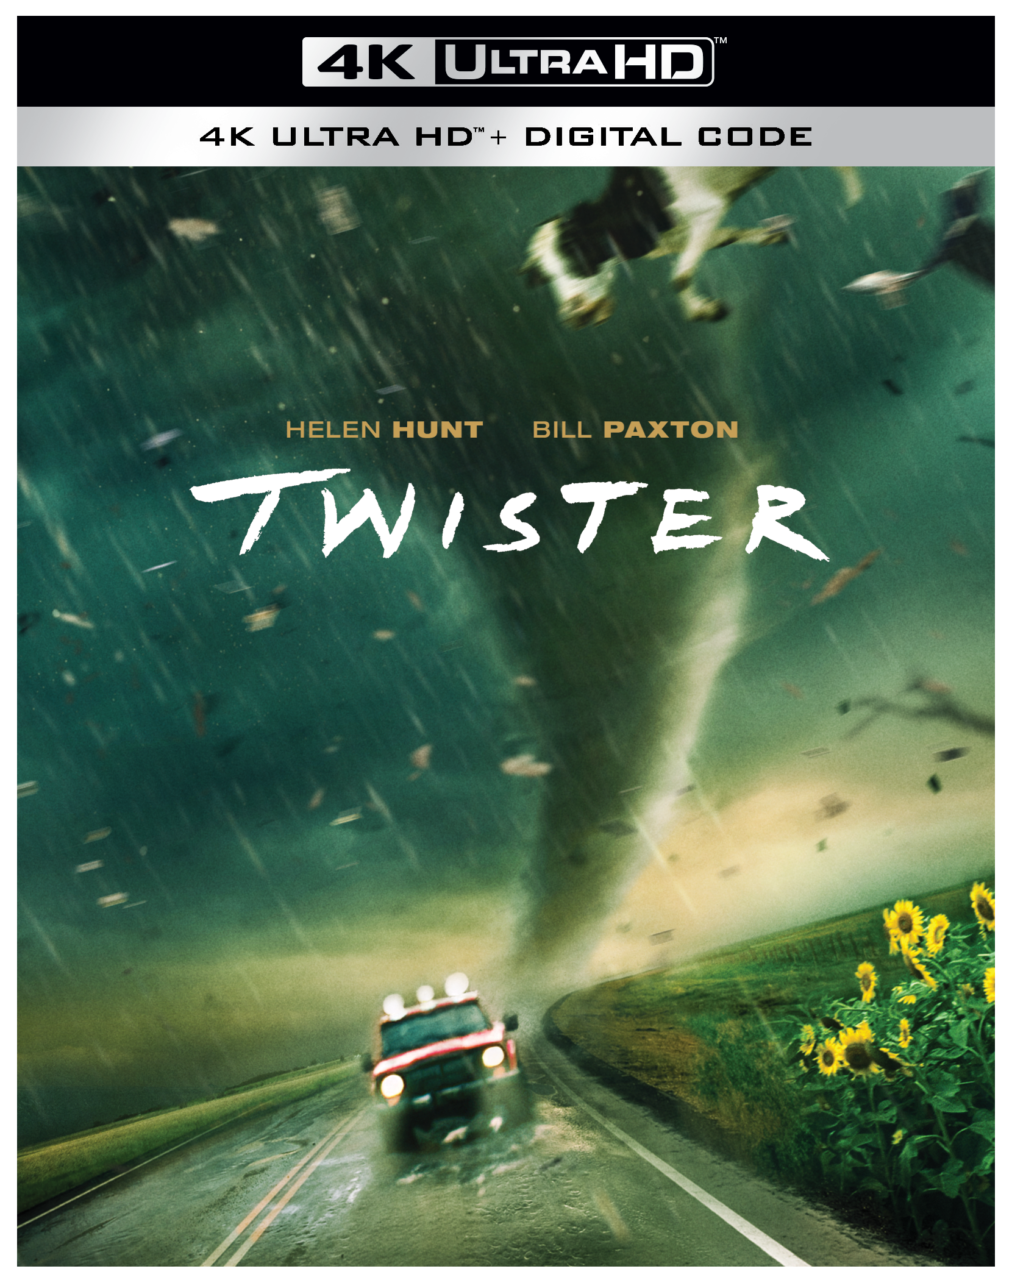 Twister 4K Ultra HD Combo Pack cover (Warner Bros. Discovery Home Entertainment)